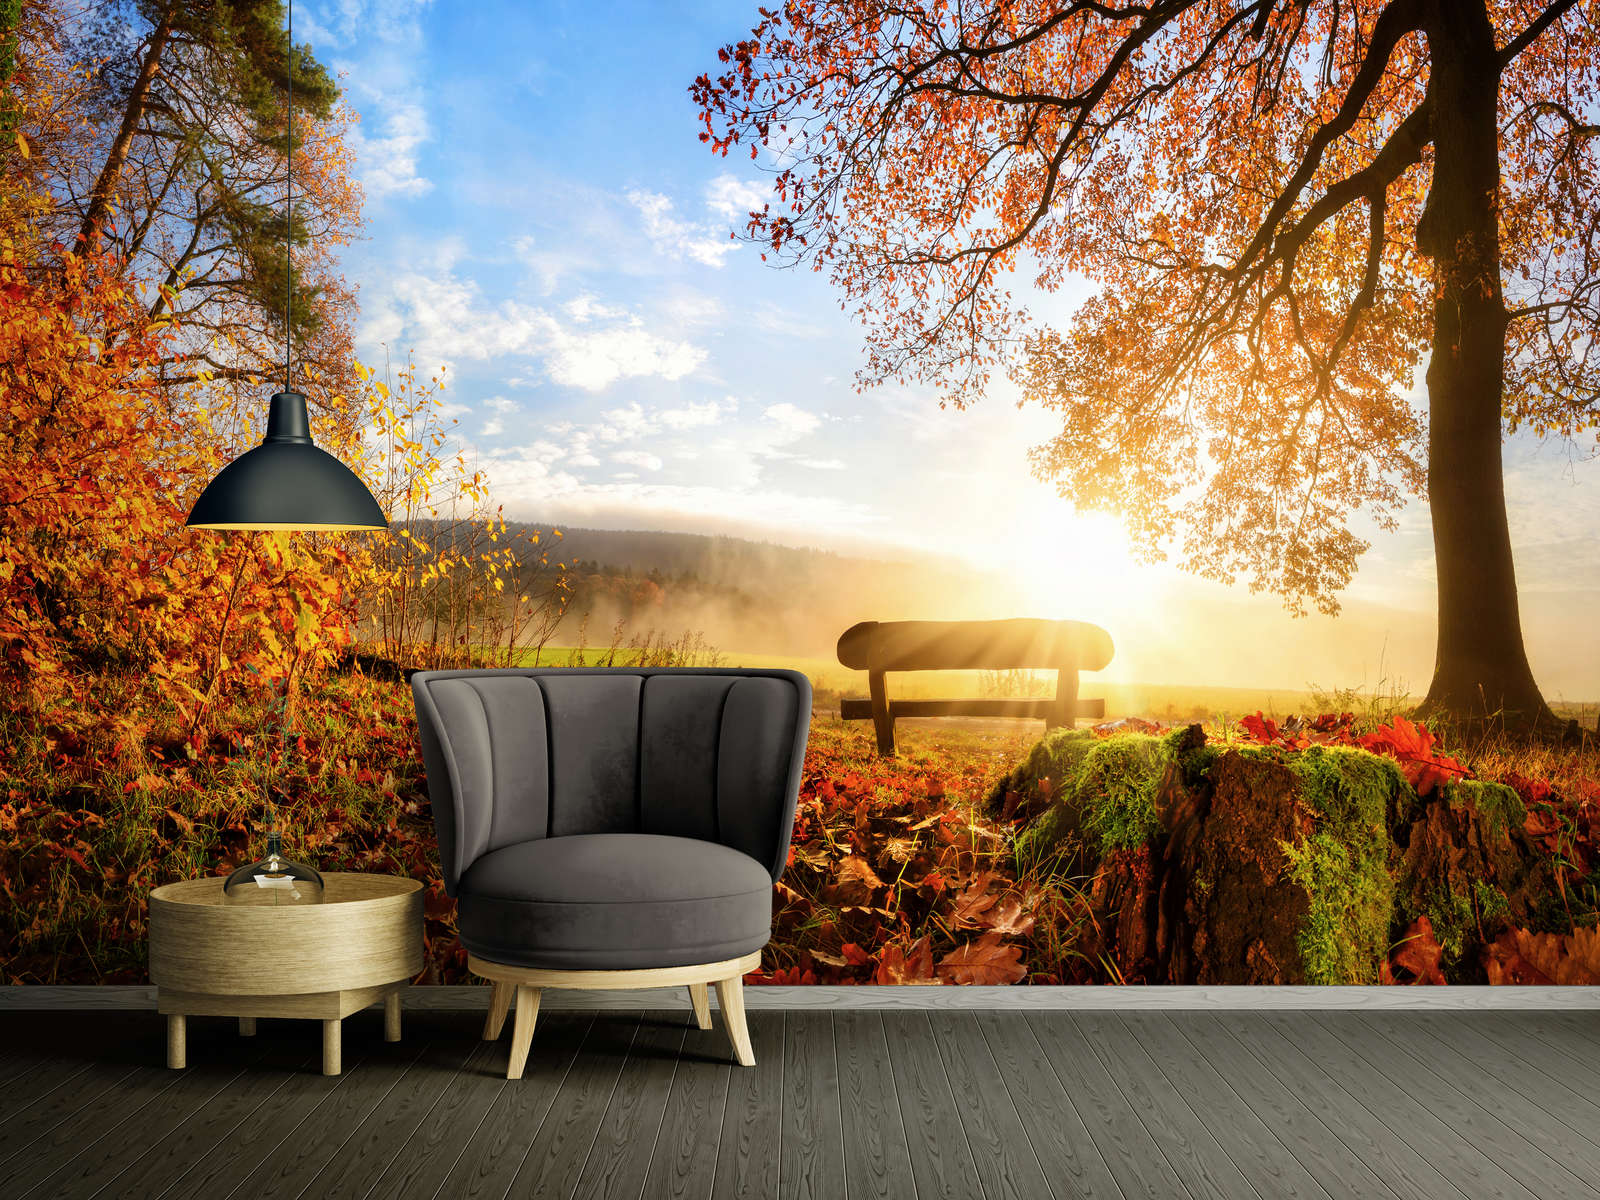             Fotomurali Bench in the Forest on an Autumn Morning - Pile liscio Premium
        